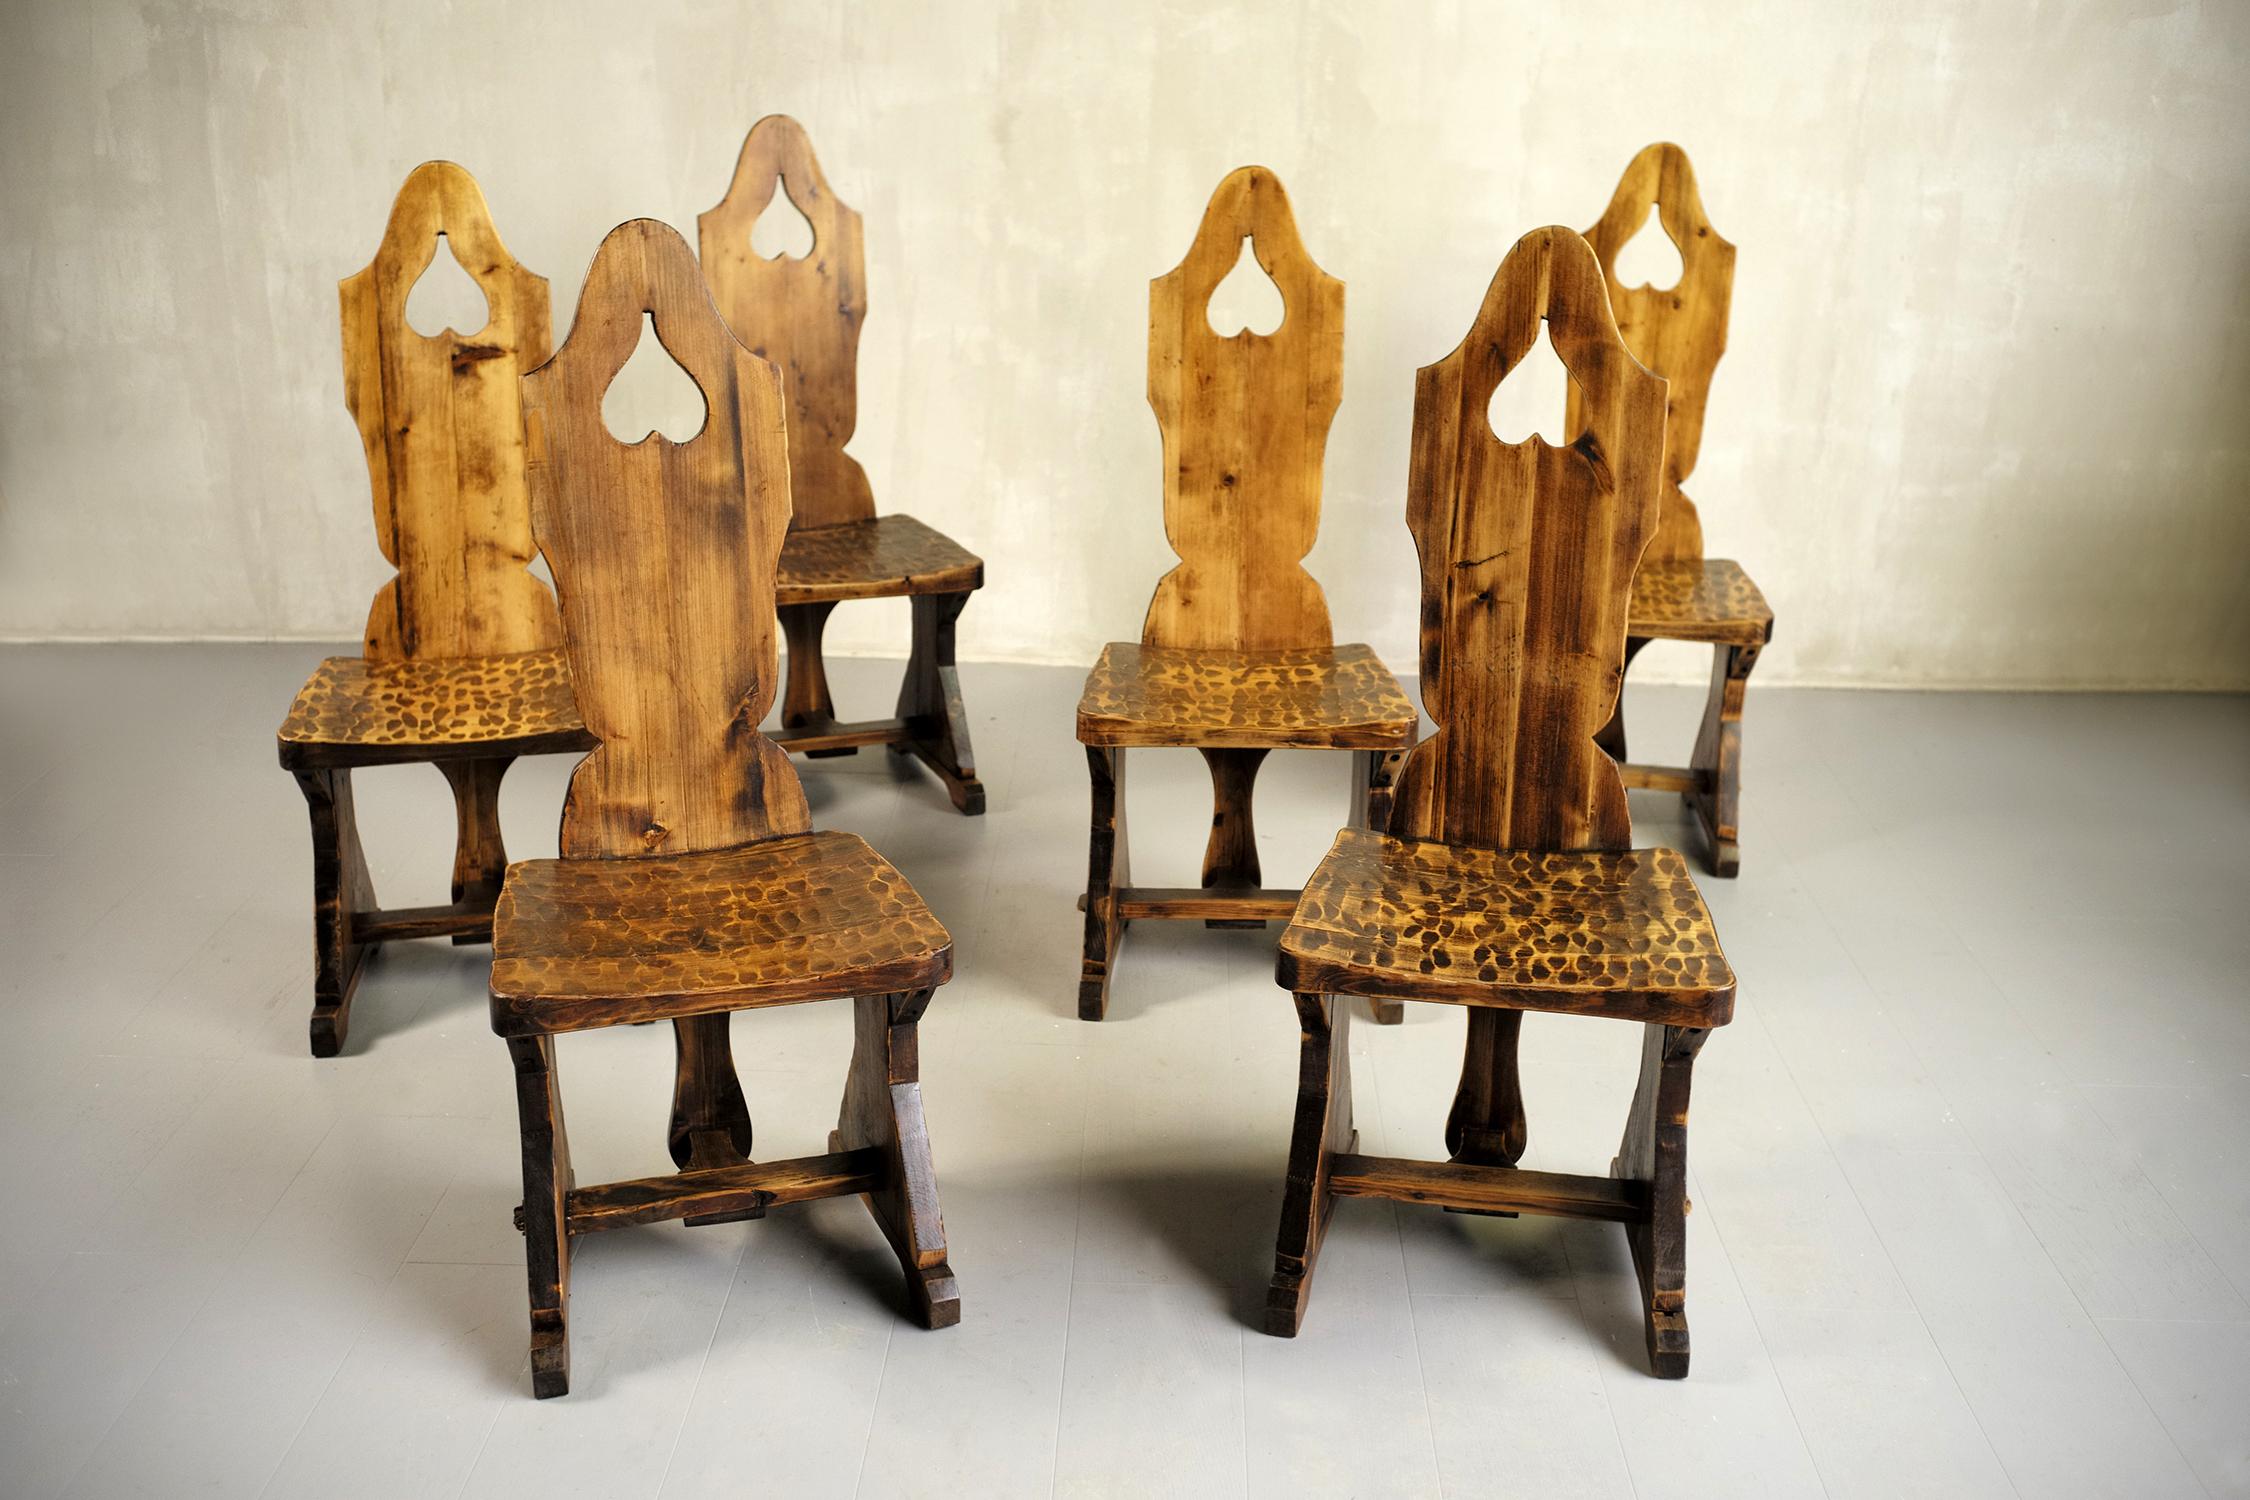 Set of 6 fir chairs, France 1950. The backrest is decorated with an upside-down heart (according to historians, this symbol was used by Protestants during the French religious wars). The seat is worked with a gouge, the base is lined with a beech